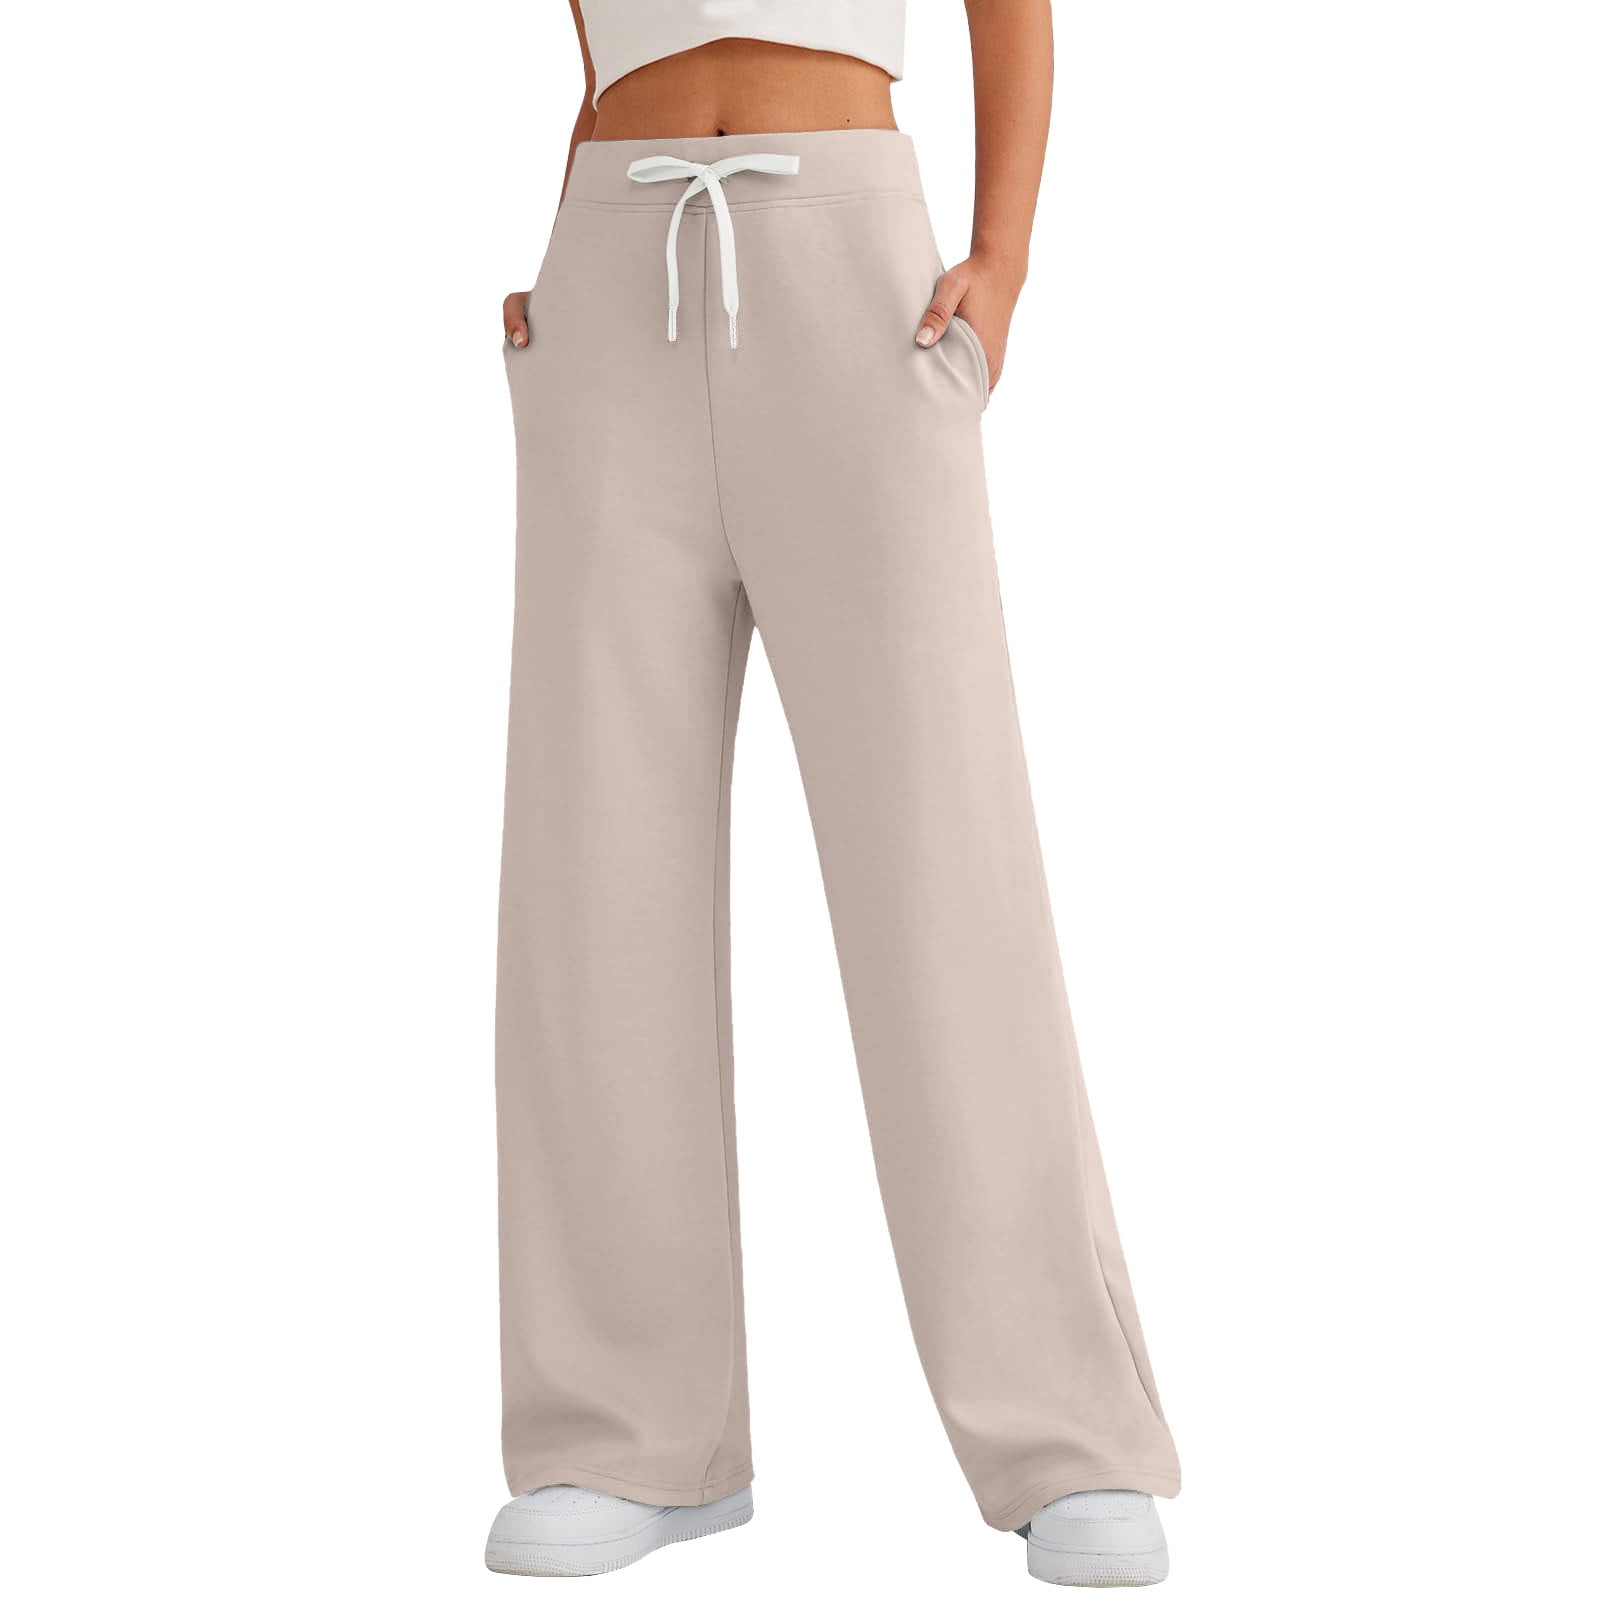 Susanny Straight Leg Sweatpants for Women Fleece Lined Drawstring Straight  Leg with Pockets Joggers Pants Baggy Athletic Petite High Waisted Gym  Sweatpants White L 